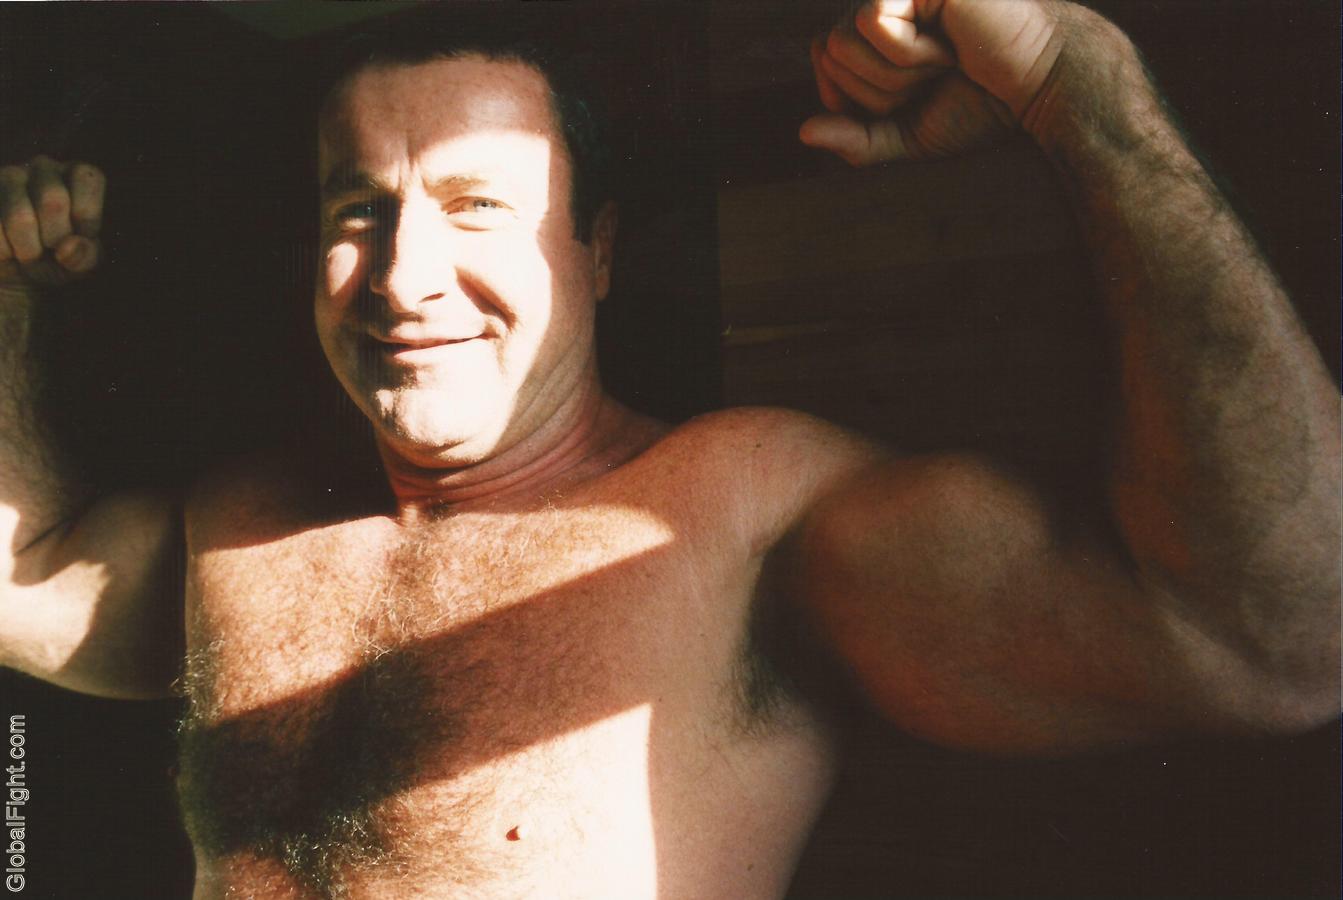 huge hairy powerlifting woodshed daddy flexing muscles.jpg